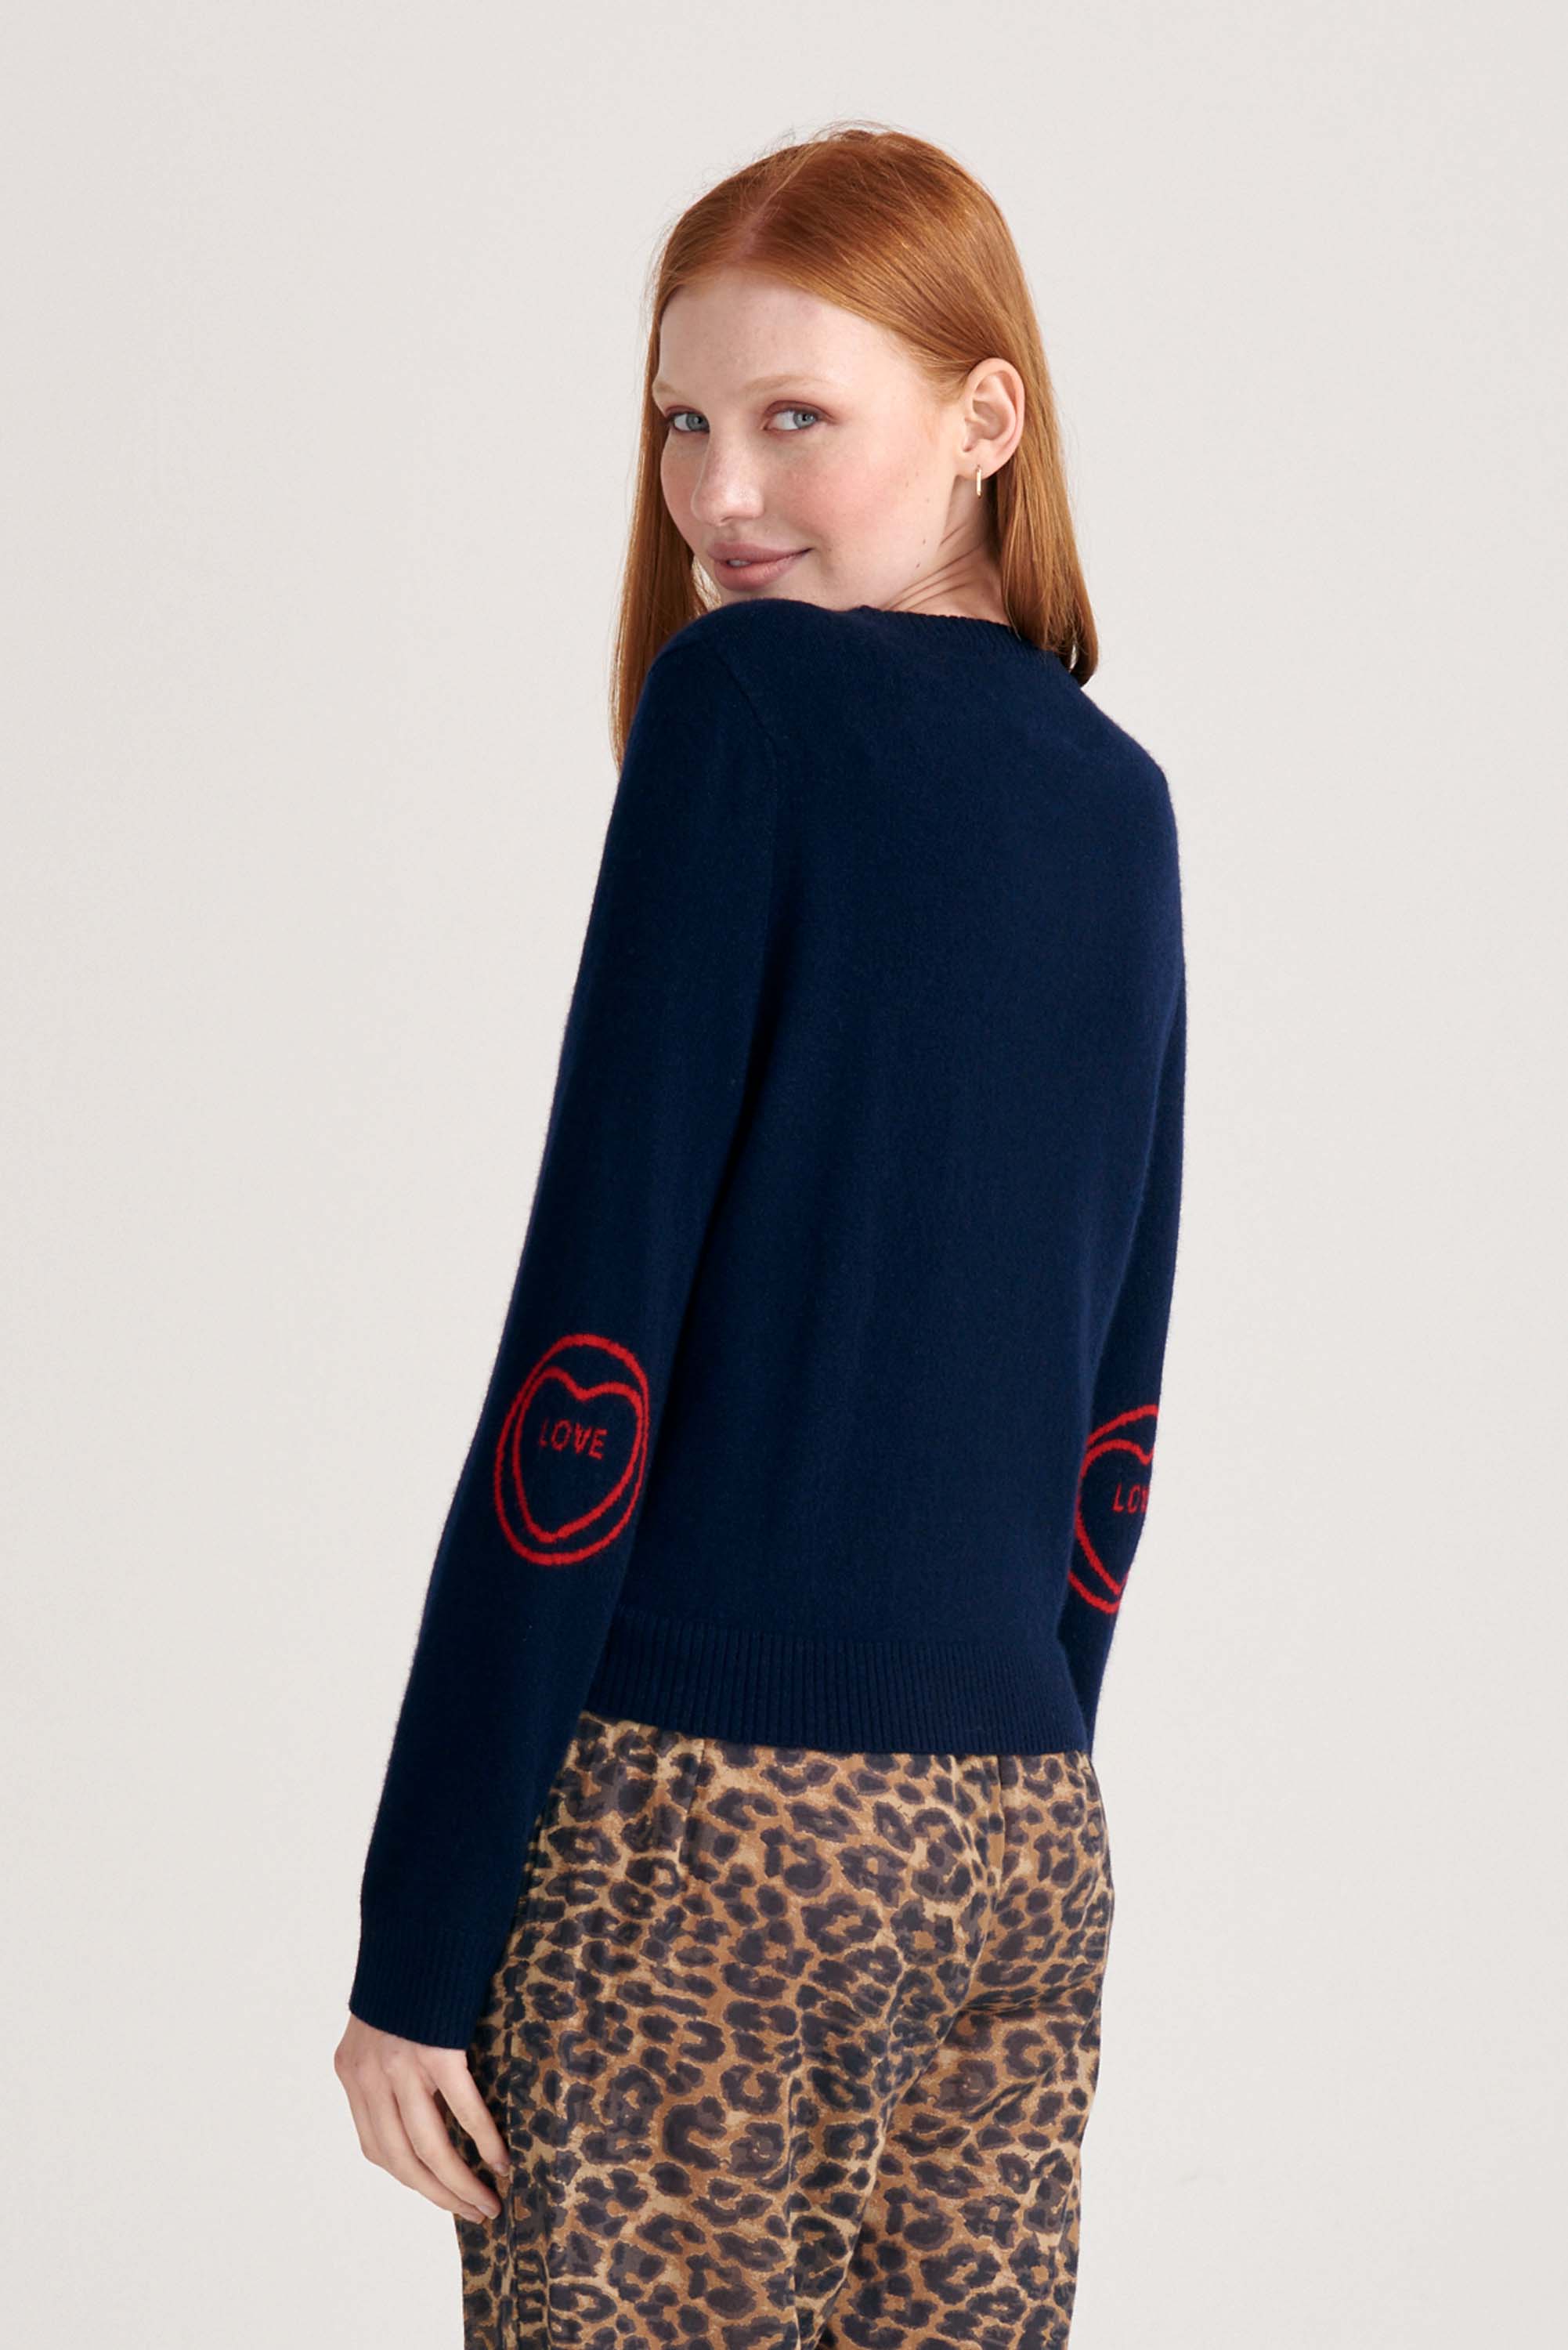 Red haired female model wearing Jumper1234 Navy cashmere crew neck jumper with red love heart intarsia elbow patches facing away from the camera